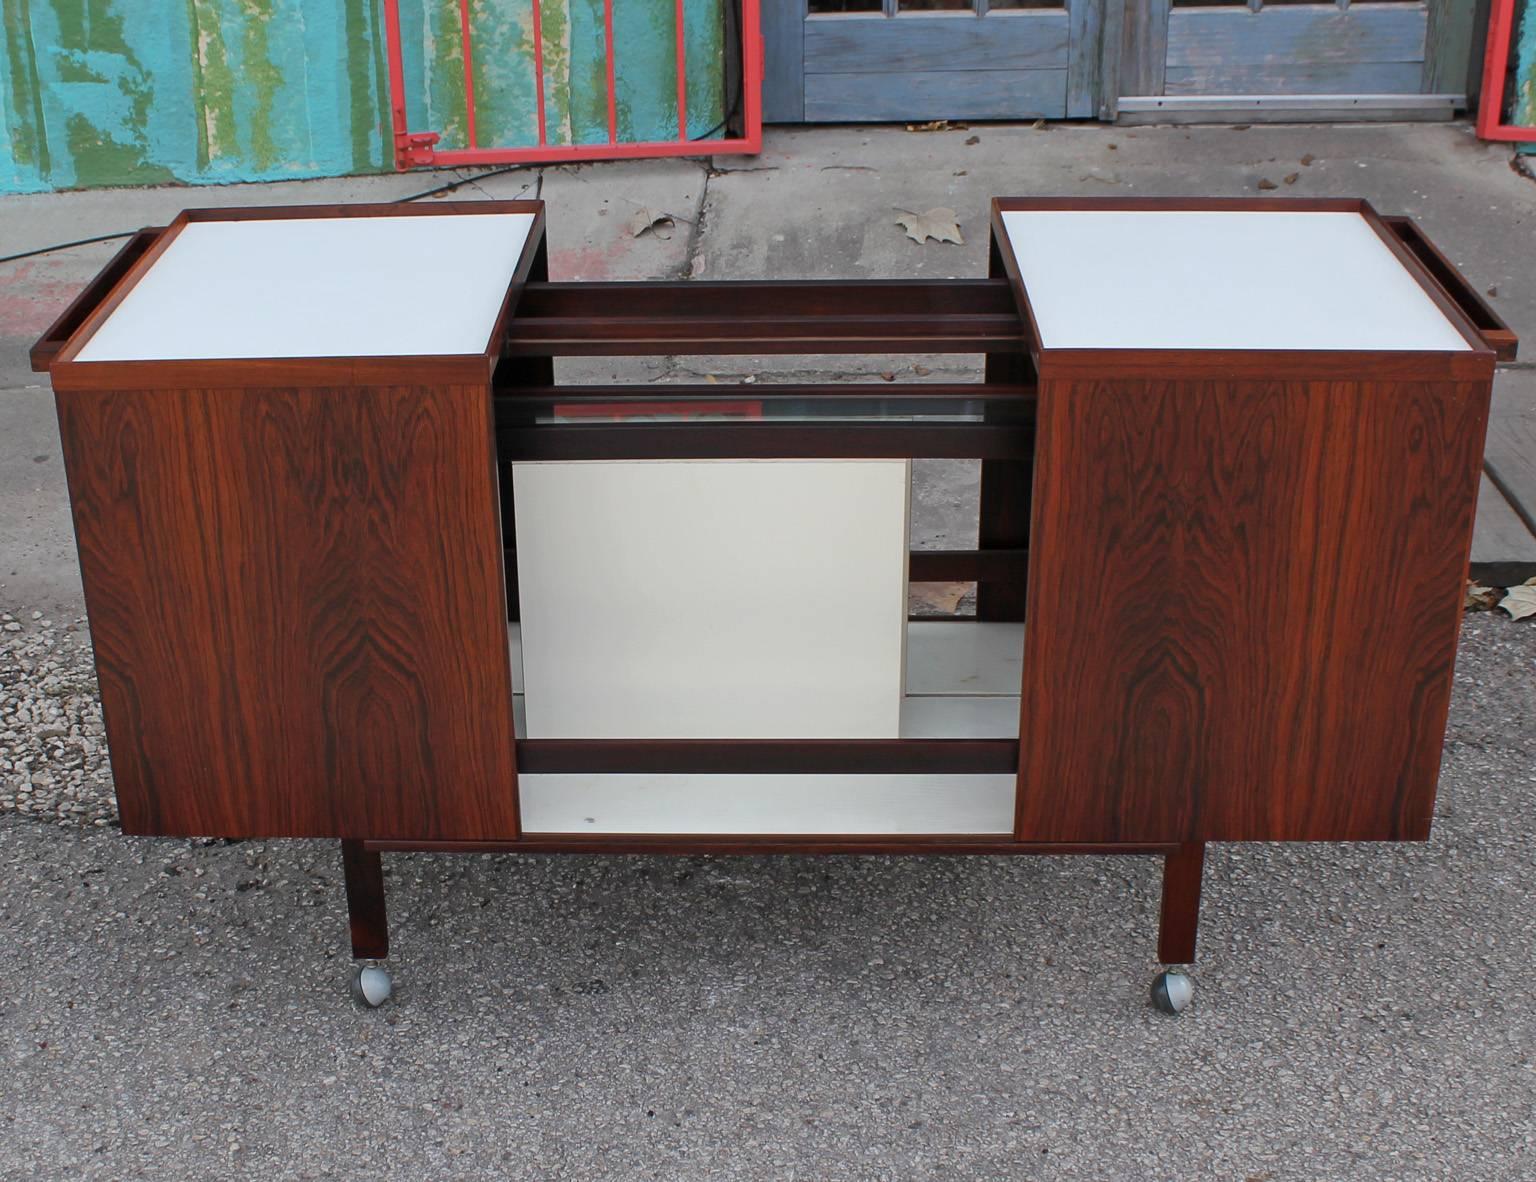 Lovely rosewood bar cart, opens to revel storage space, white laminate top. Stamped on bottom 